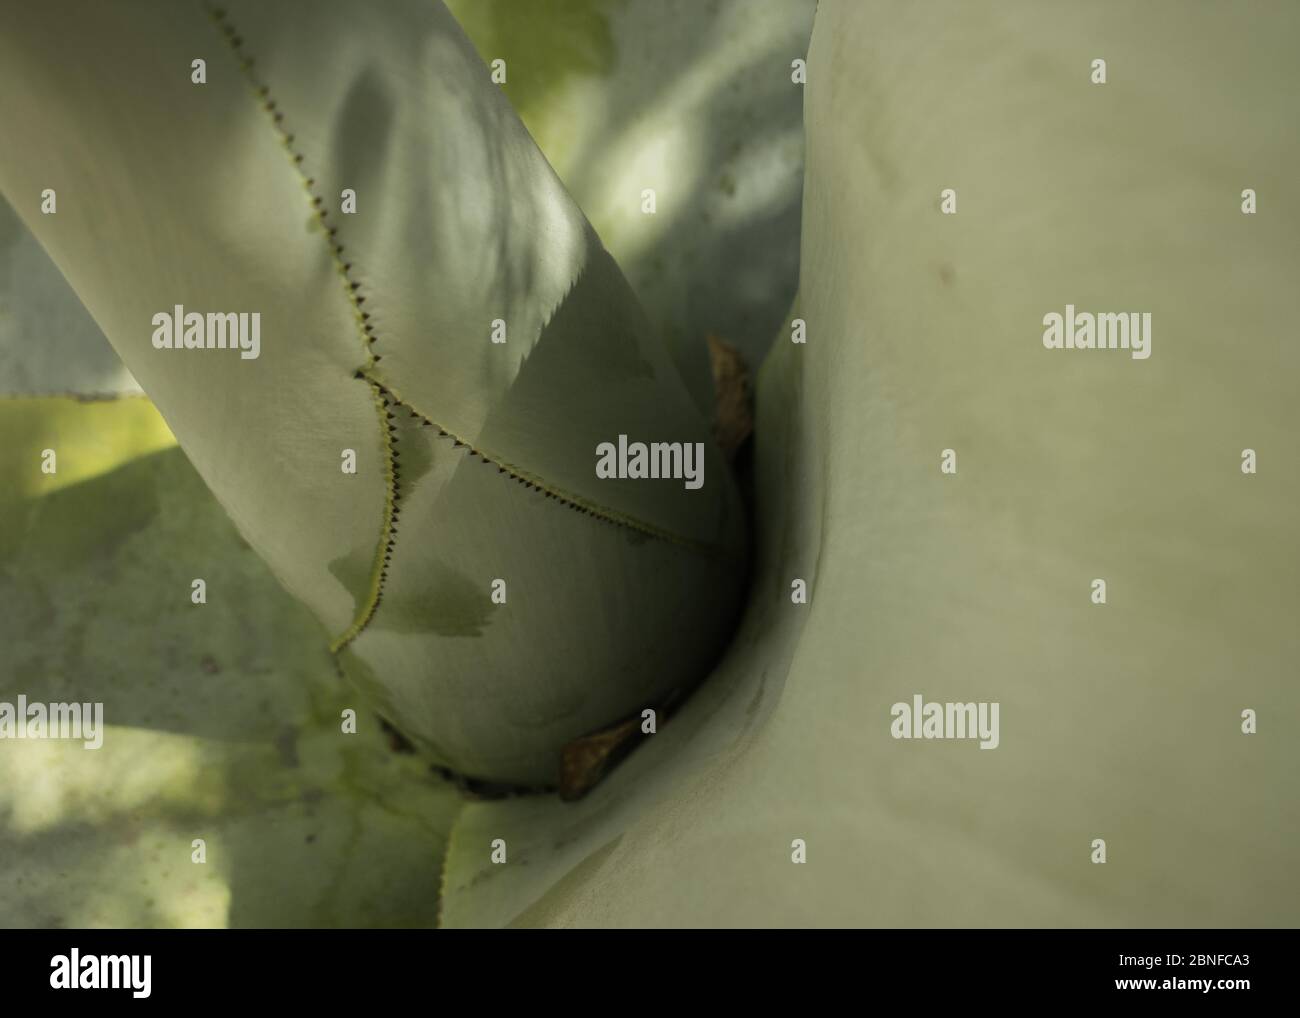 Extreme closeup of a shoot of a succulent plant Stock Photo